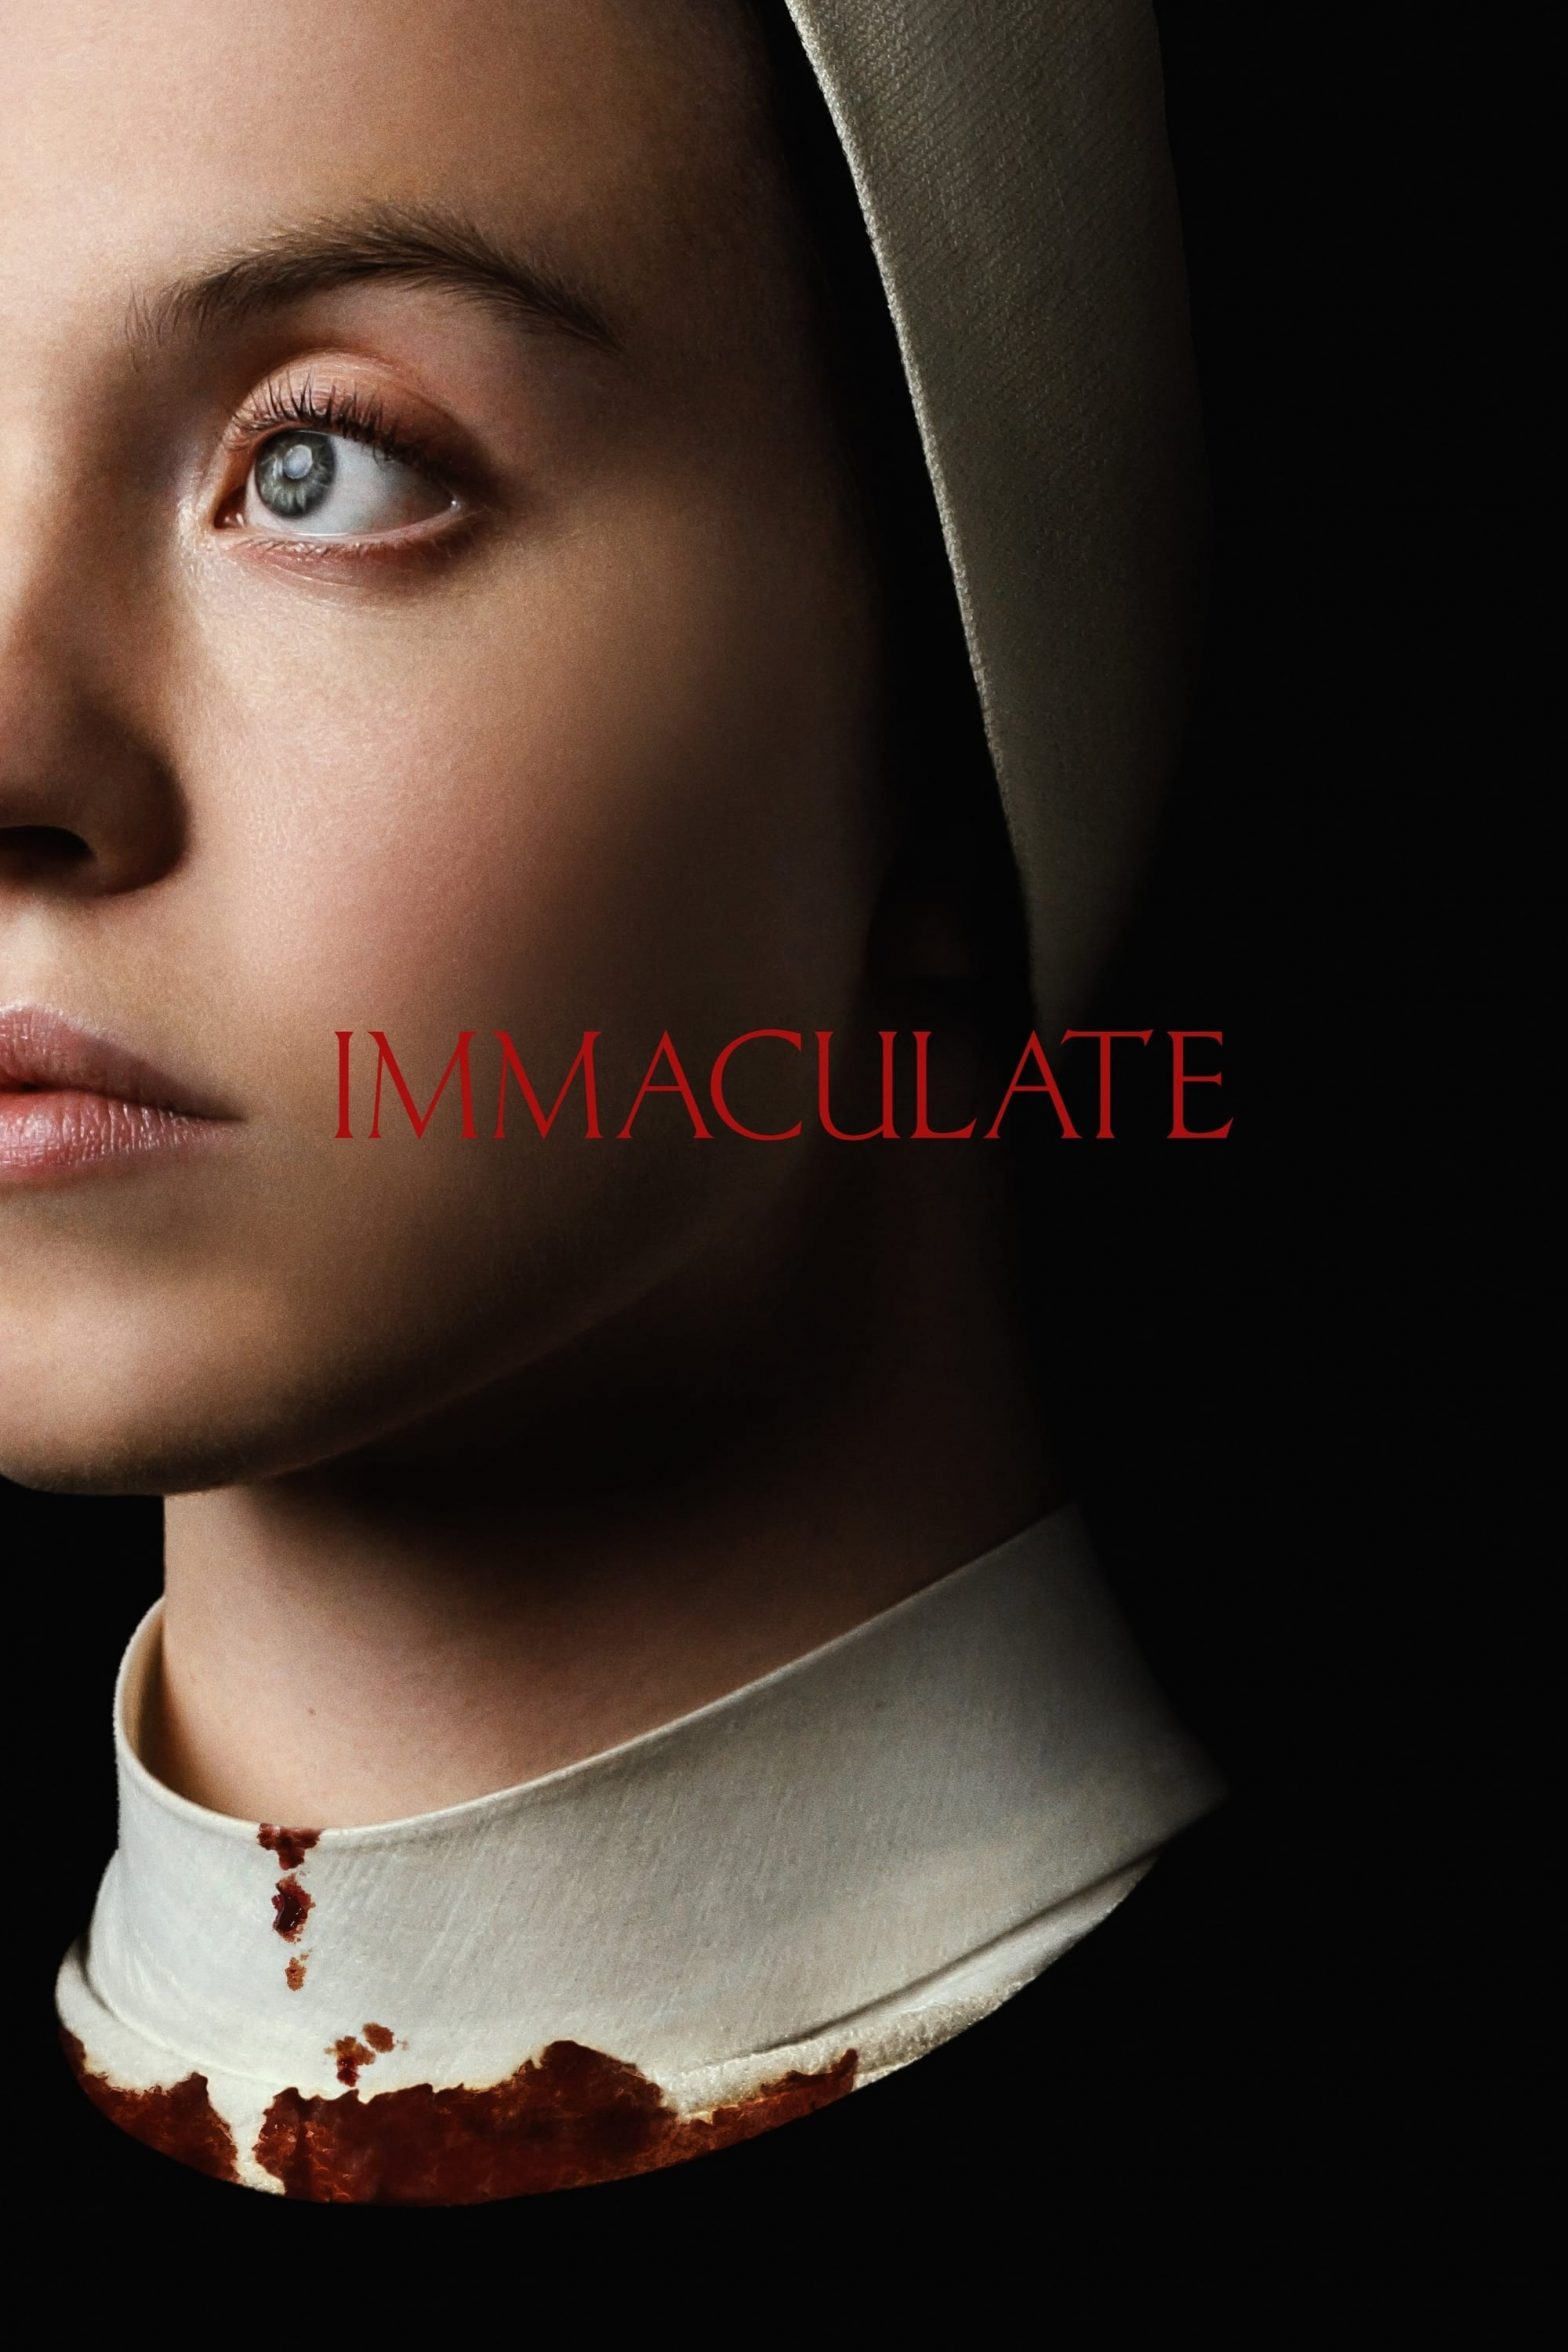 Poster for the movie "Immaculate"